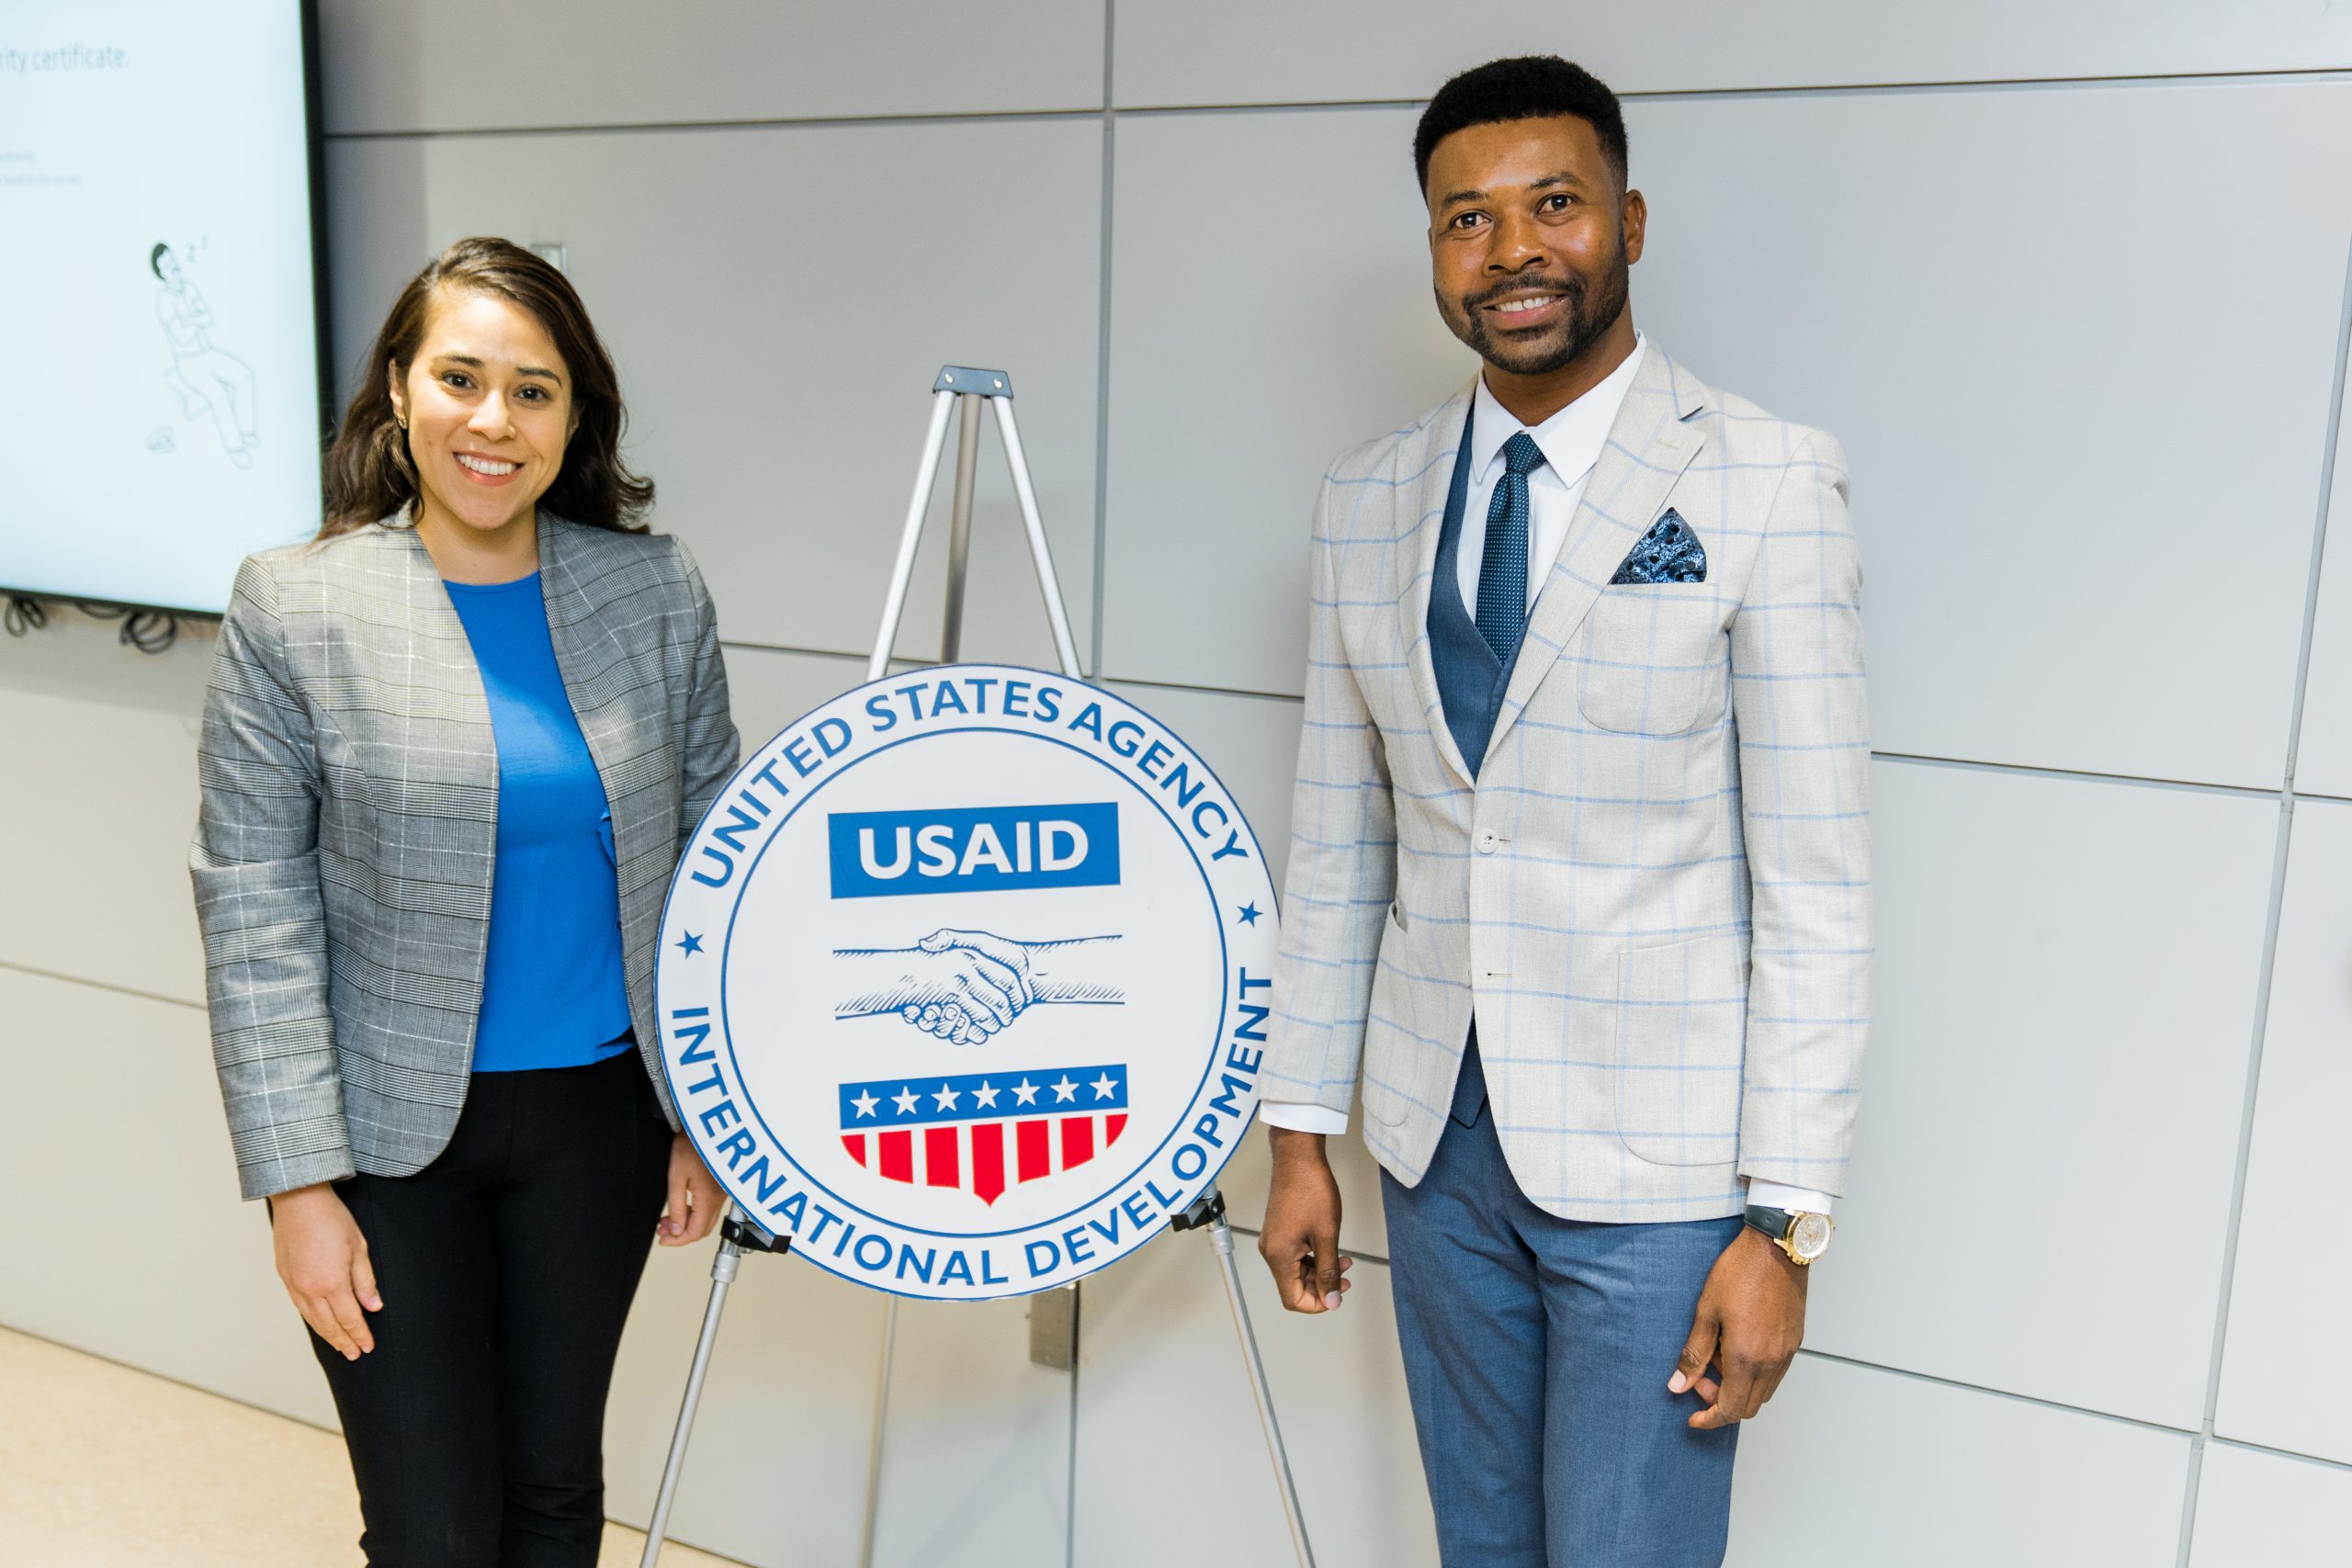 Master of global affairs students Lamarre Présuma (Haiti) and Angelina Soriano (Mexico) presented their research on fighting poverty in Haiti to peace development experts at USIP and USAID.